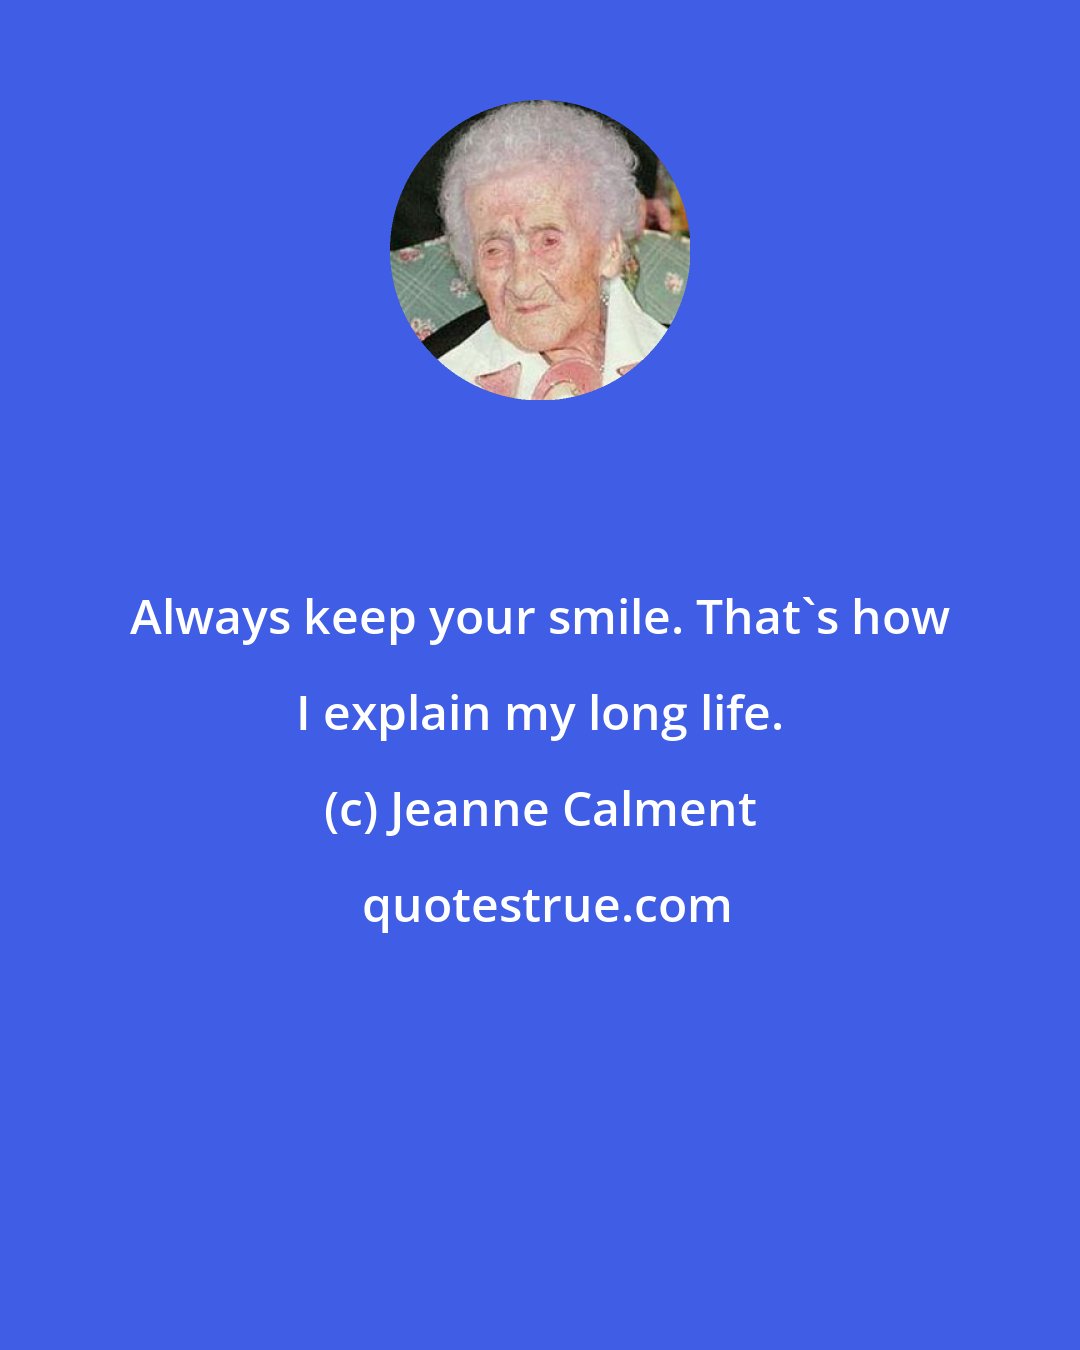 Jeanne Calment: Always keep your smile. That's how I explain my long life.